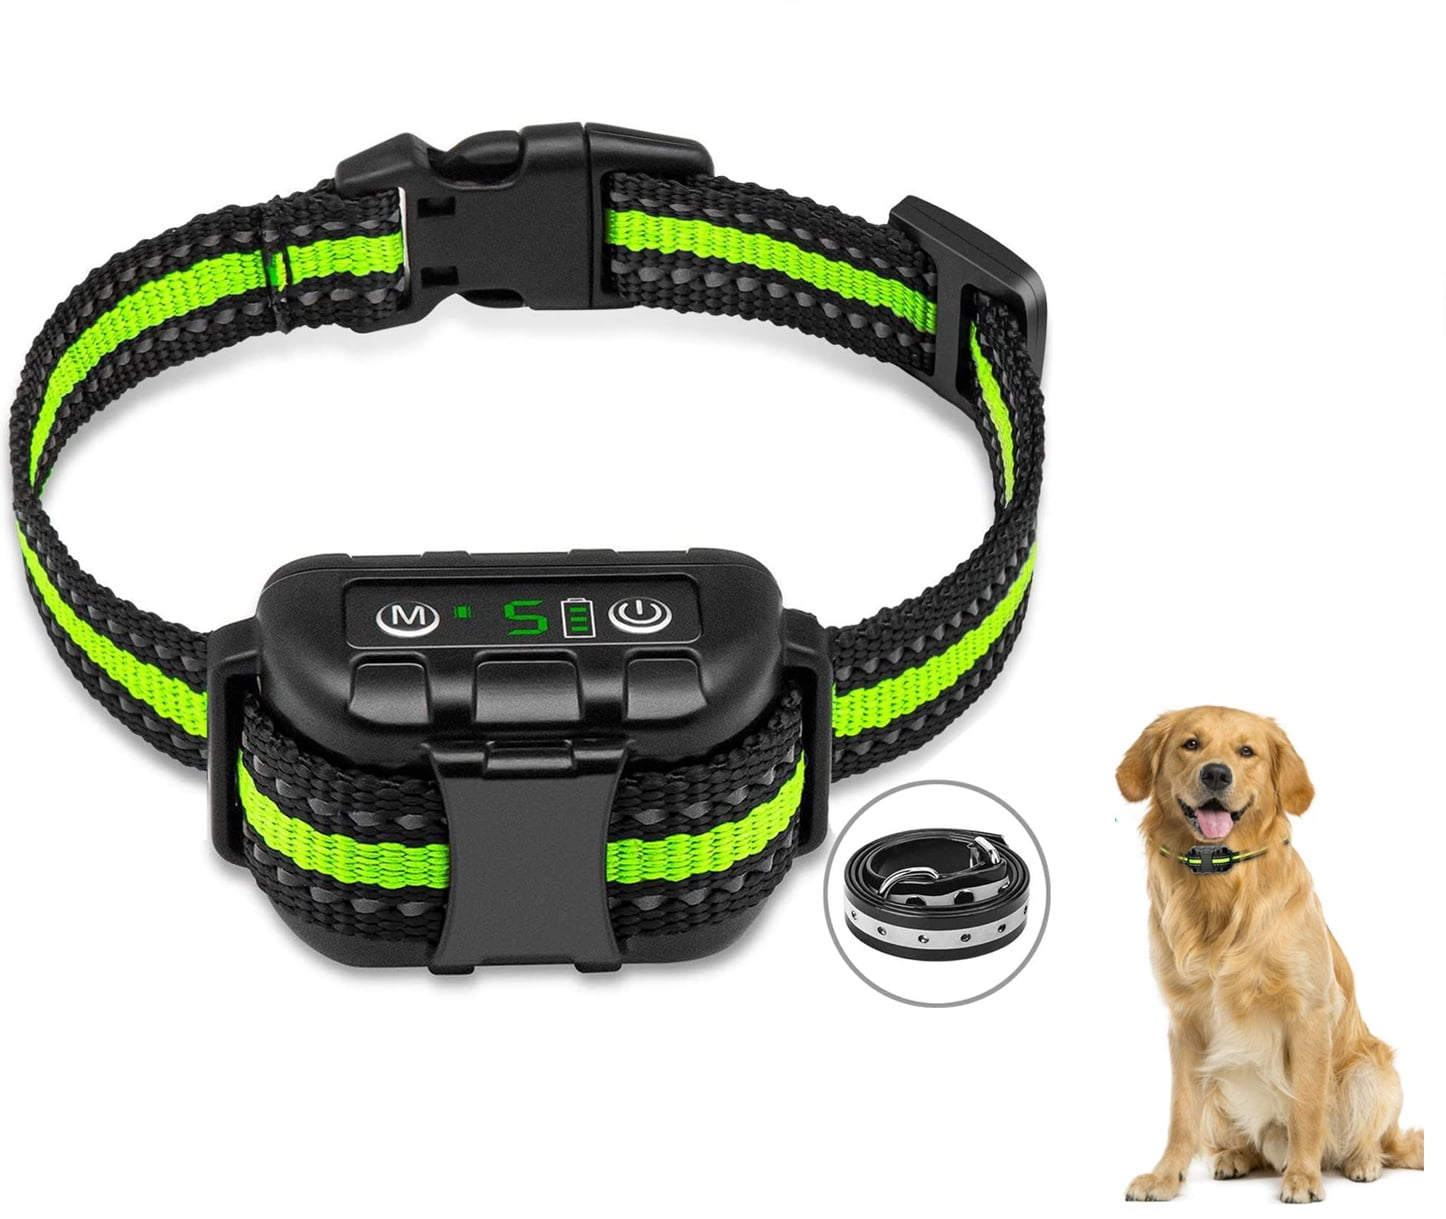 Black Fiddy Dog Training Shock Collar,Waterproof Bark Collar with Remote Control and 1000 Yard Remote for Small Medium Large Dogs,Beep Vibration and Shock 3 Training Modes 